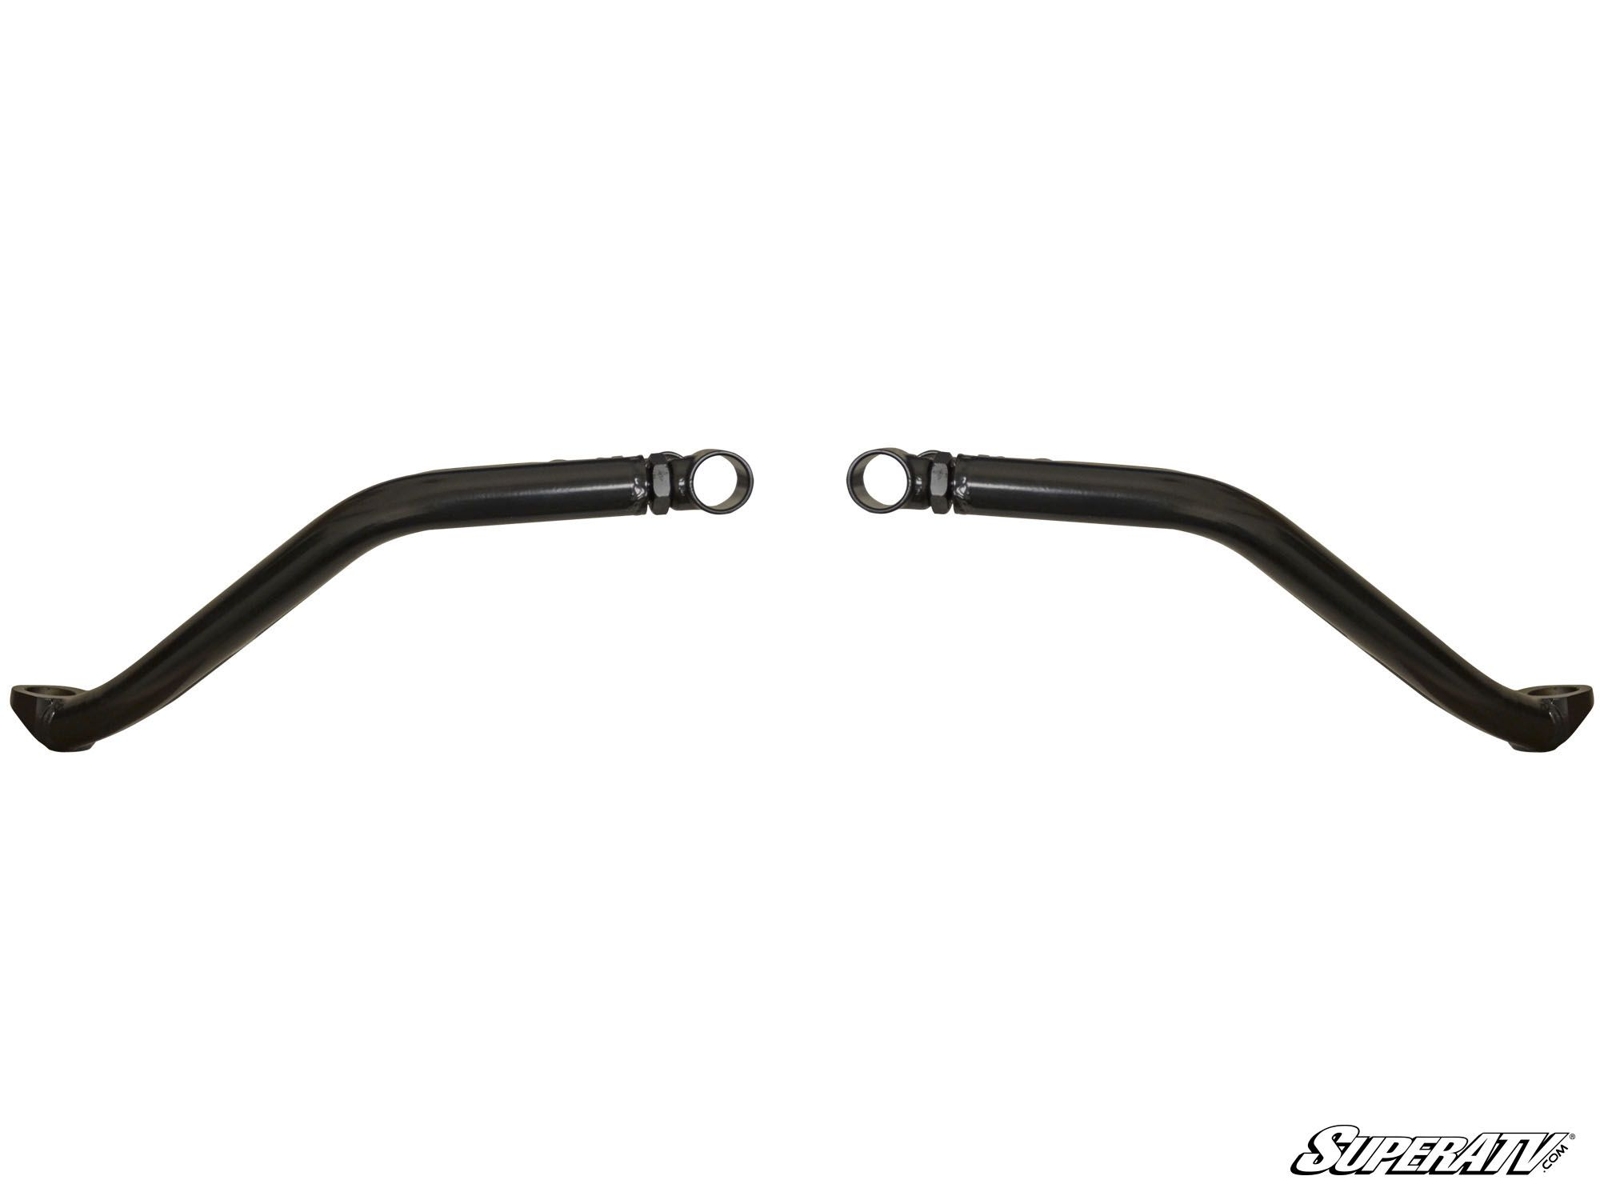 High Clearance 1.5" Forward Offset Front A-Arms - Black - For 12-21 Kawasaki Teryx - Click Image to Close